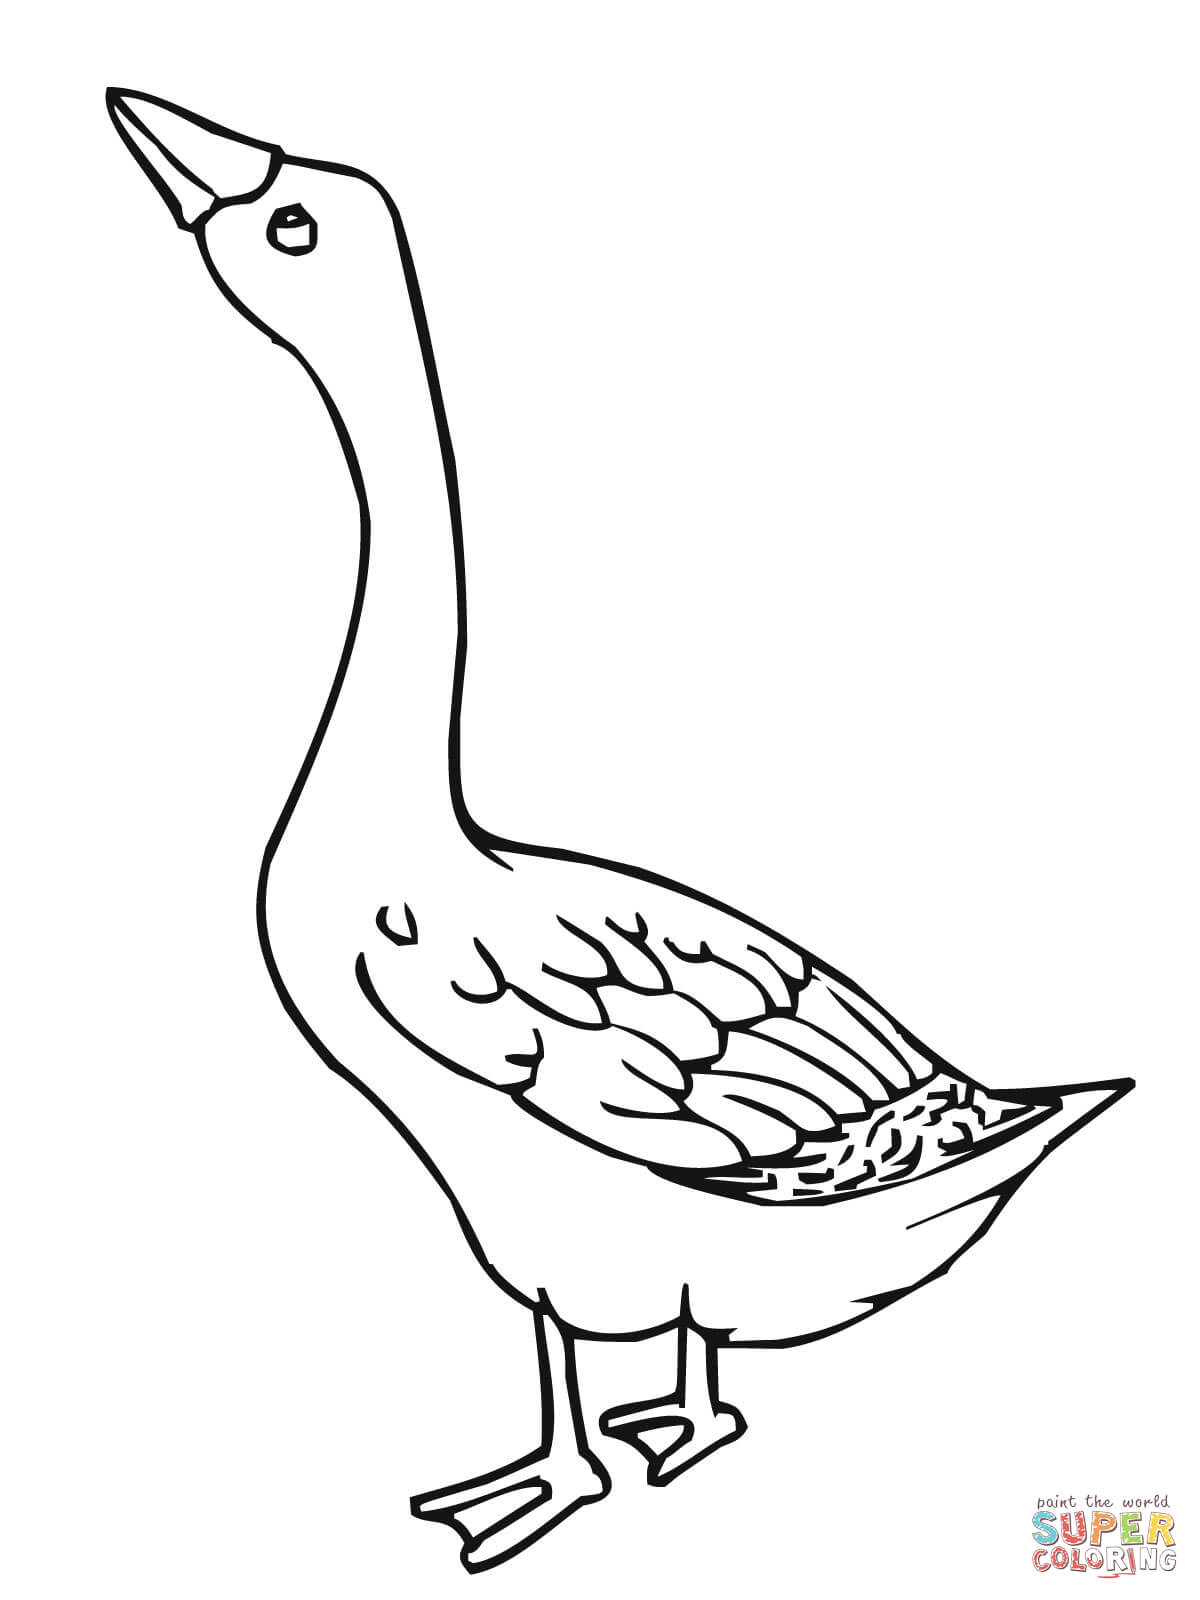 Goose Coloring Page | Program Ideas and Inspiration | Pinterest ...